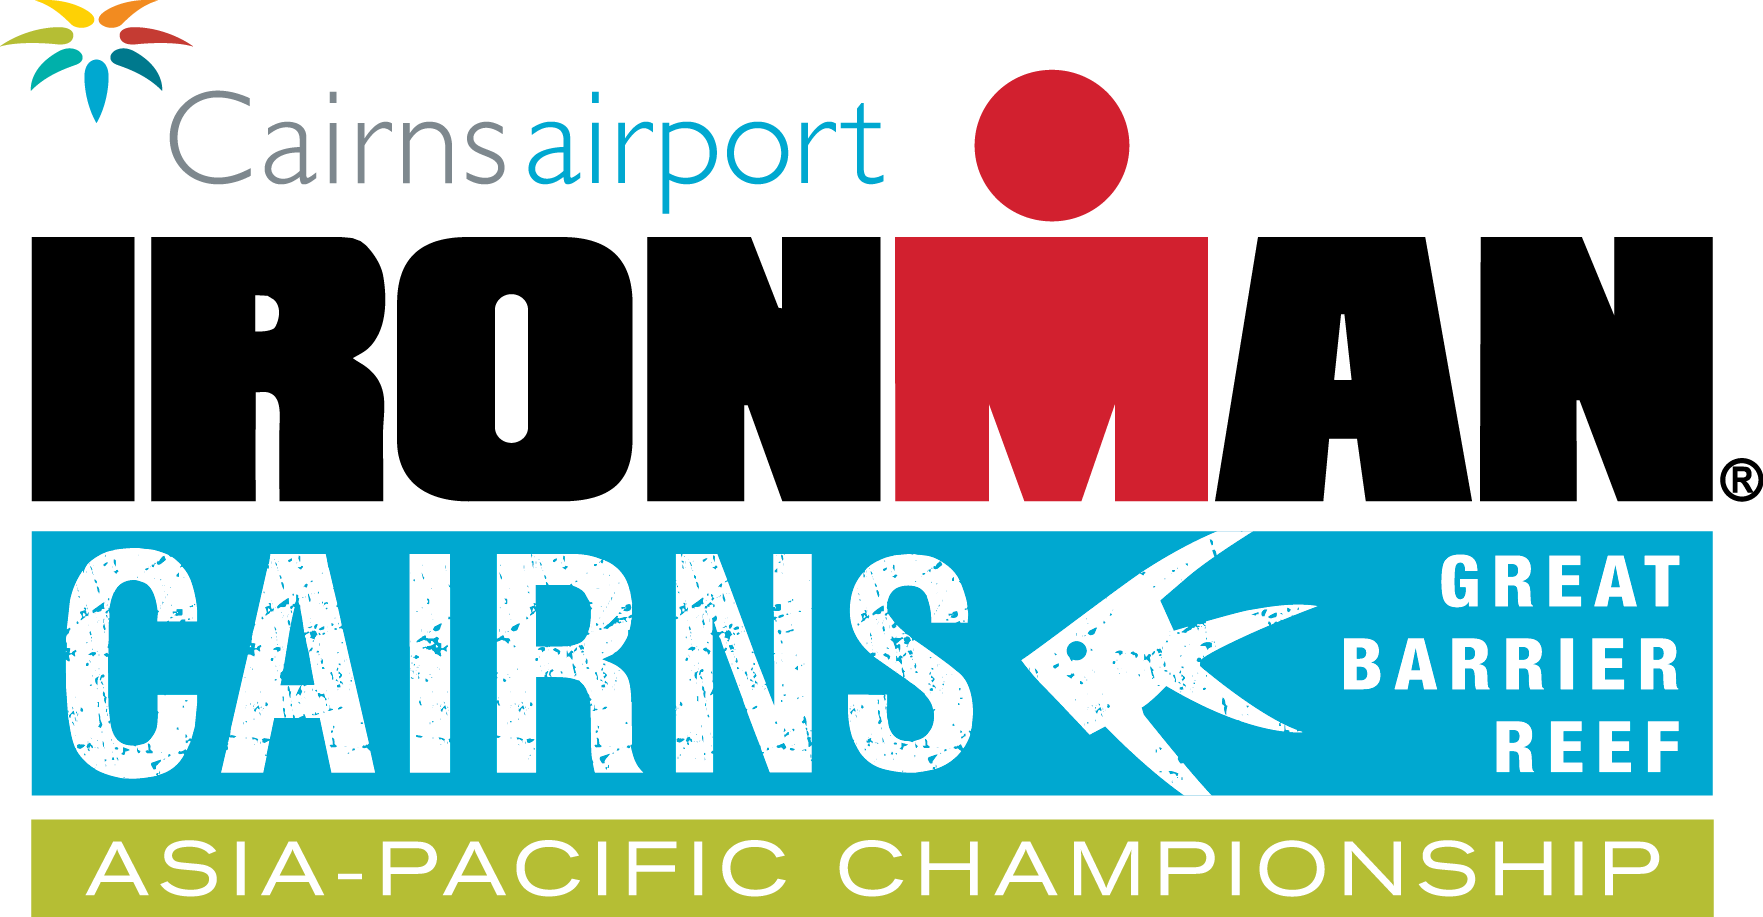 IRONMAN Asia-Pacific Championship Cairns